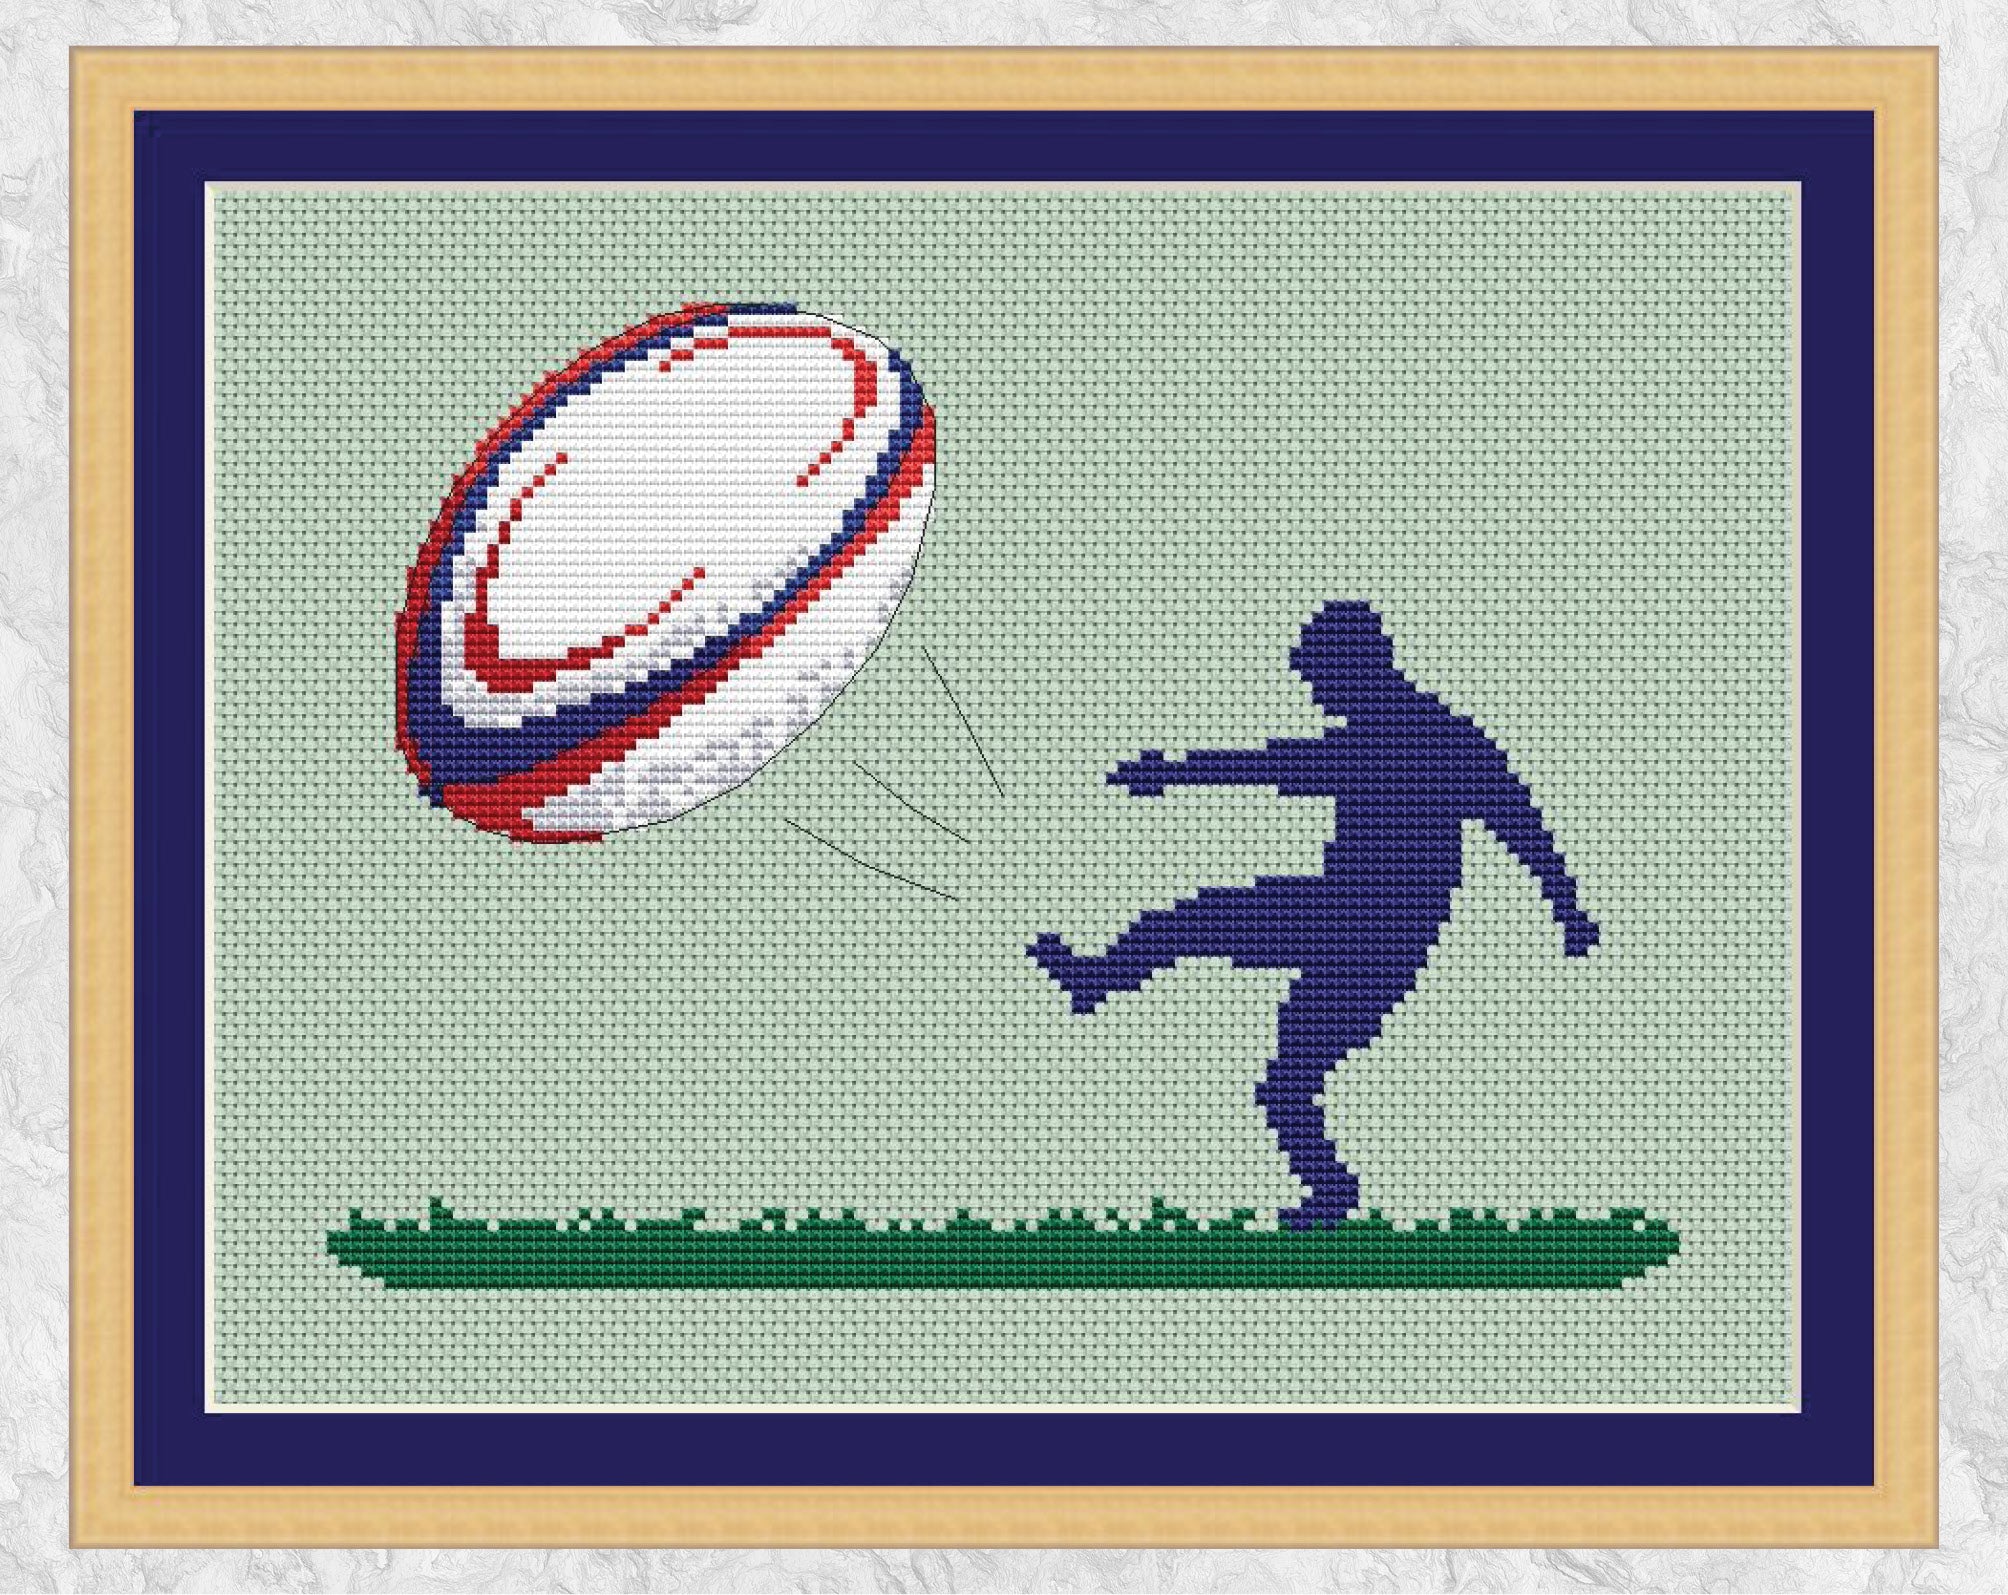 Cross stitch pattern of the silhouette of a rugby player kicking a large colourful rugby ball. Shown with frame.